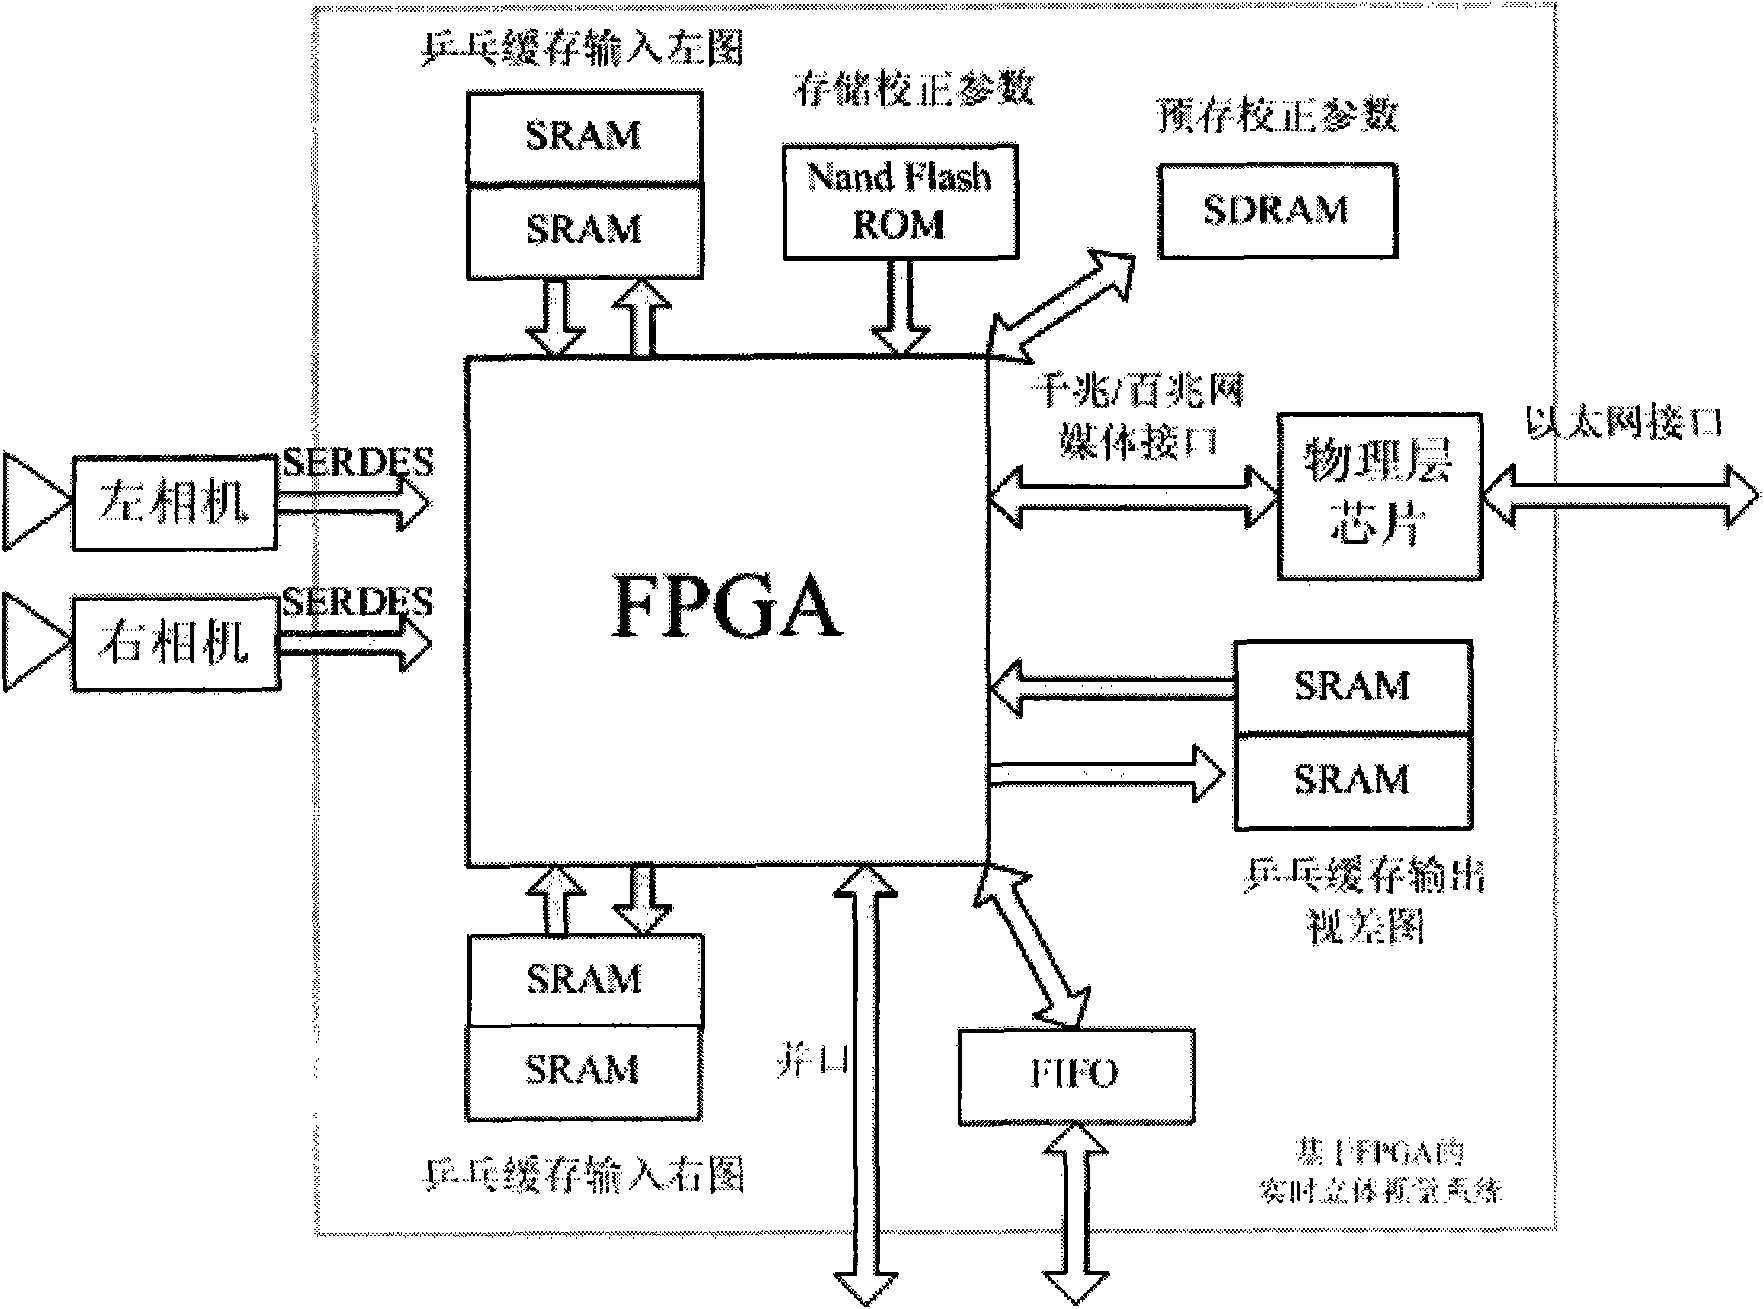 Real-time stereoscopic vision implementation method based on FPGA